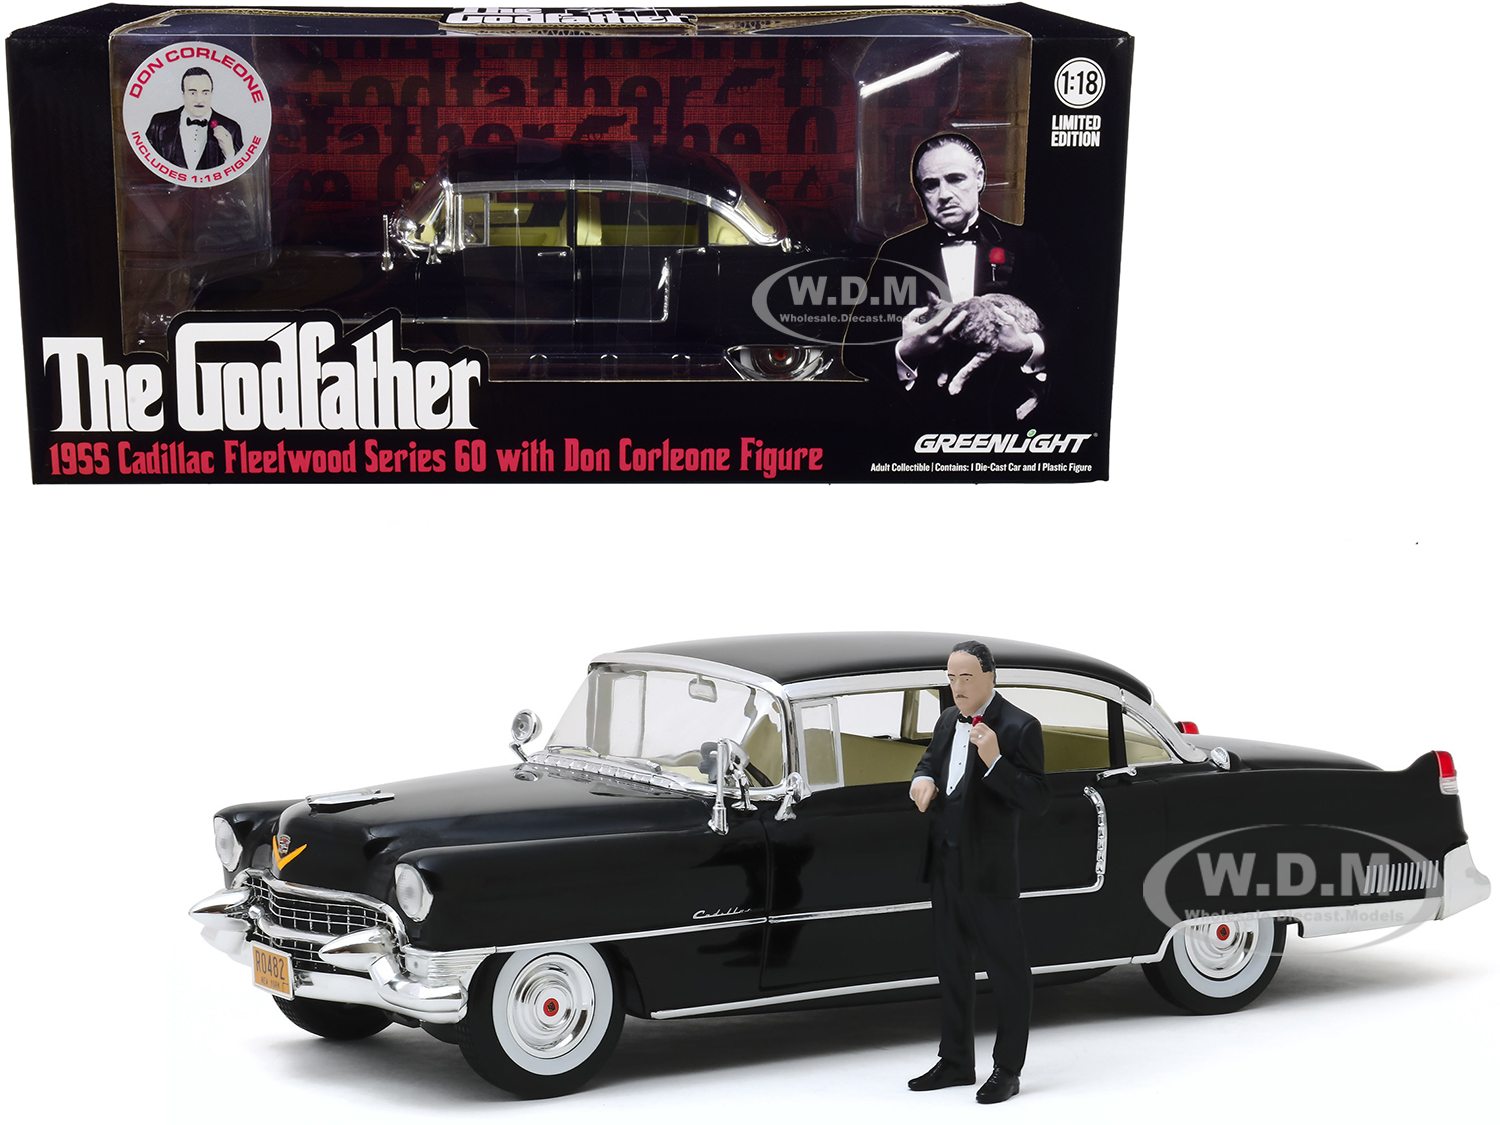 1955 Cadillac Fleetwood Series 60 Black With Don Corleone Figure "the Godfather" (1972) Movie 1/18 Diecast Model Car By Greenlight